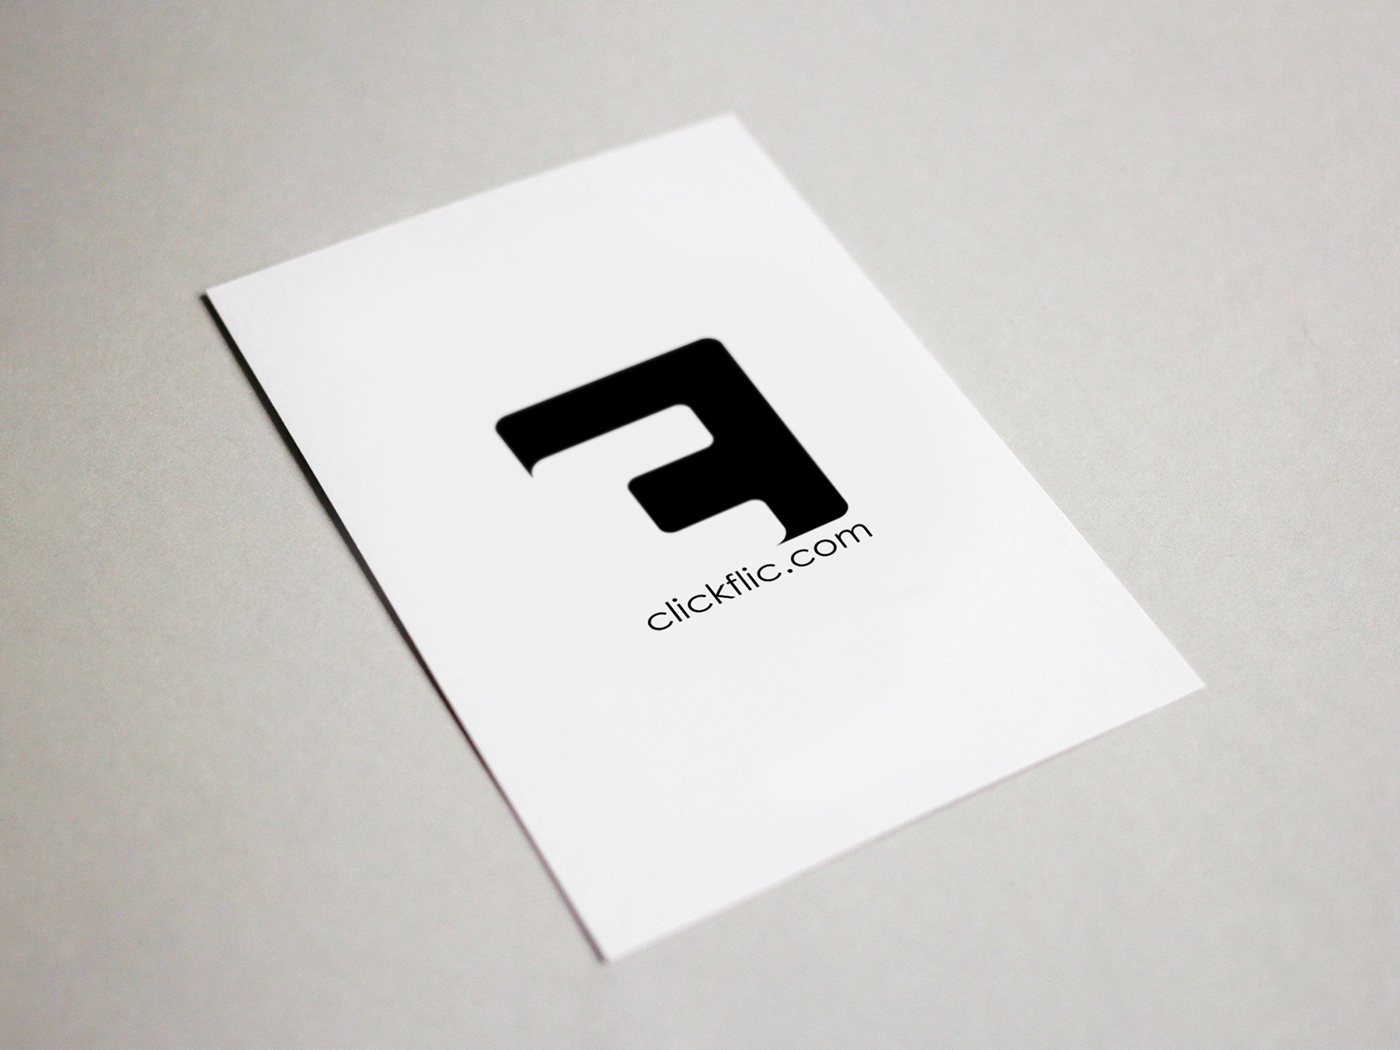 cf clickflic logo negative space lettering typography  